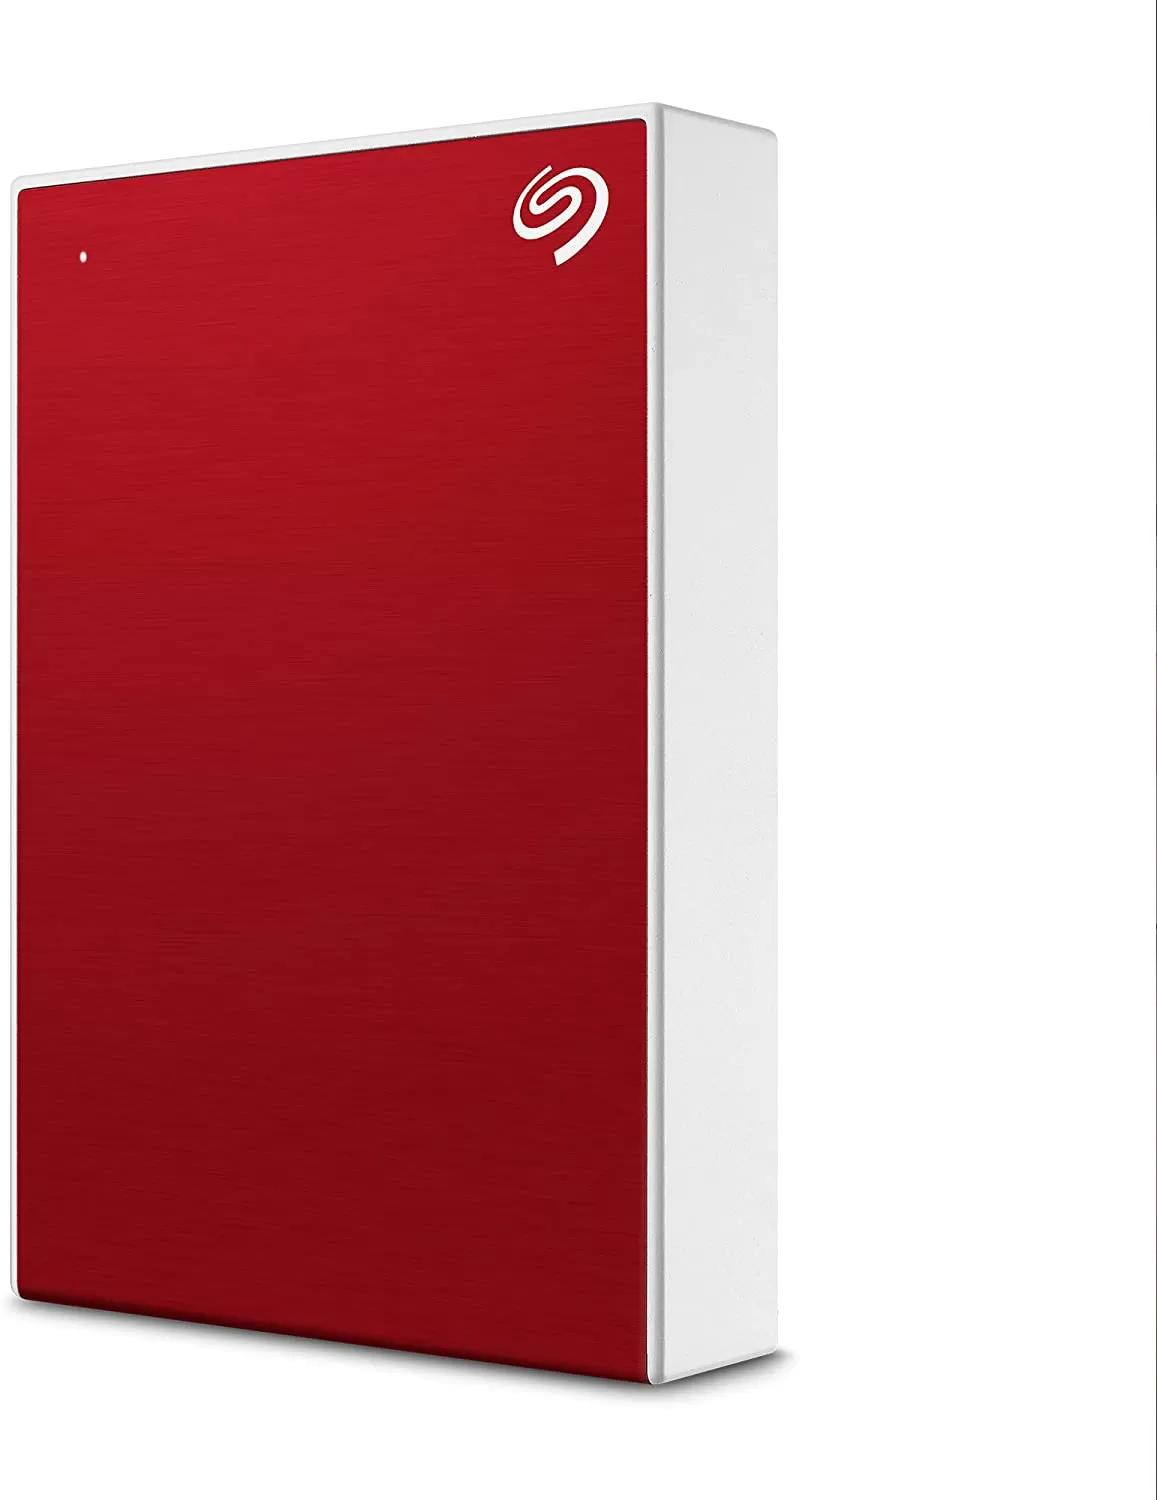 Hard Disk Extern Seagate One Touch 2TB USB 3.0 Red